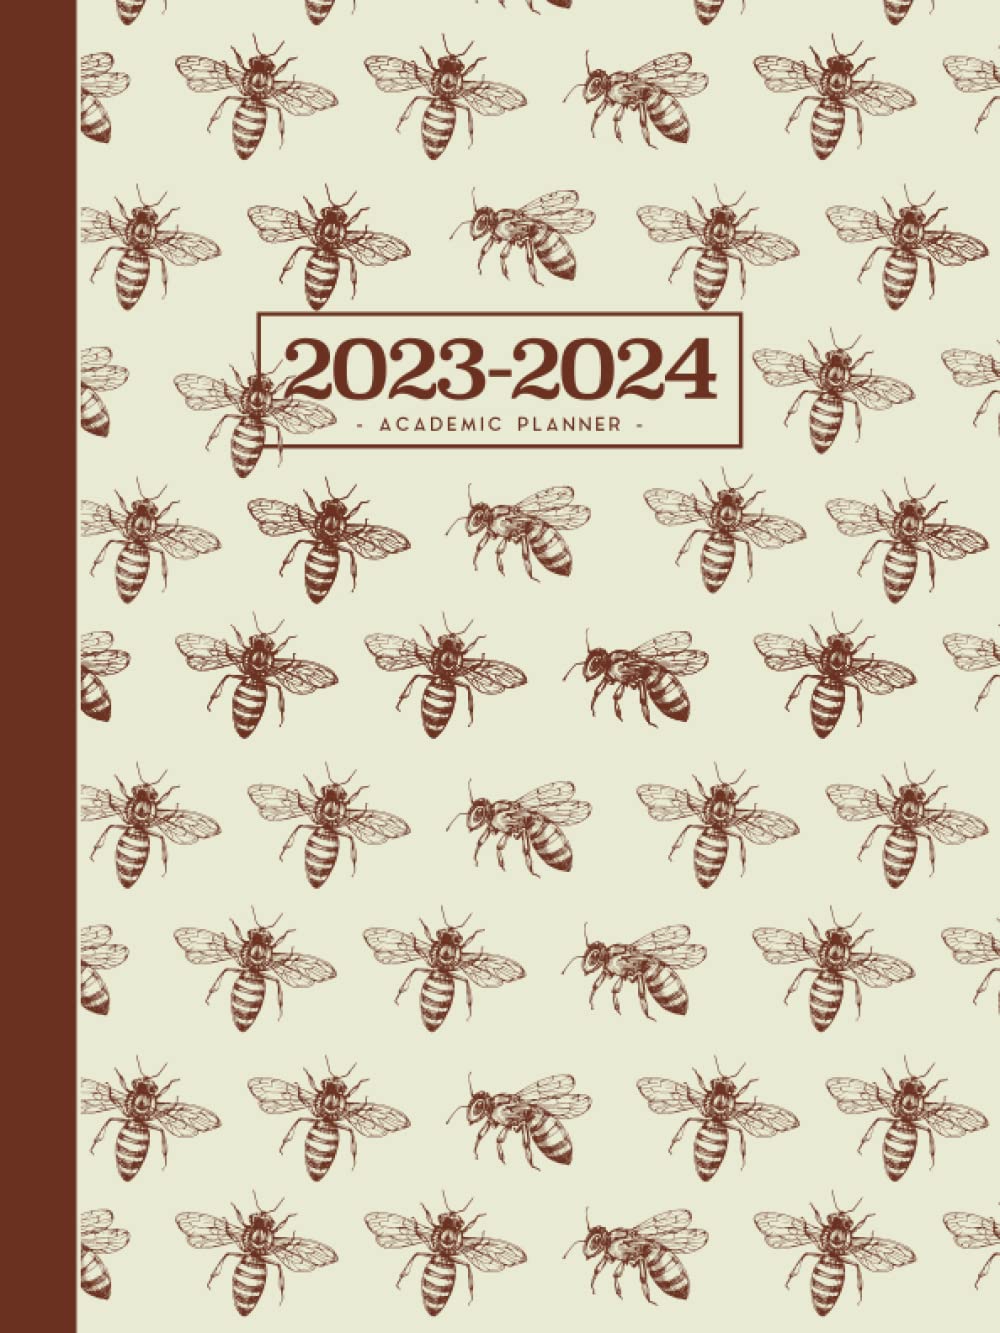 Academic Planner 2023-2024 Large | Classic Bumble Bees On Cream: July - June | Weekly & Monthly | US Federal Holidays and Moon Phases